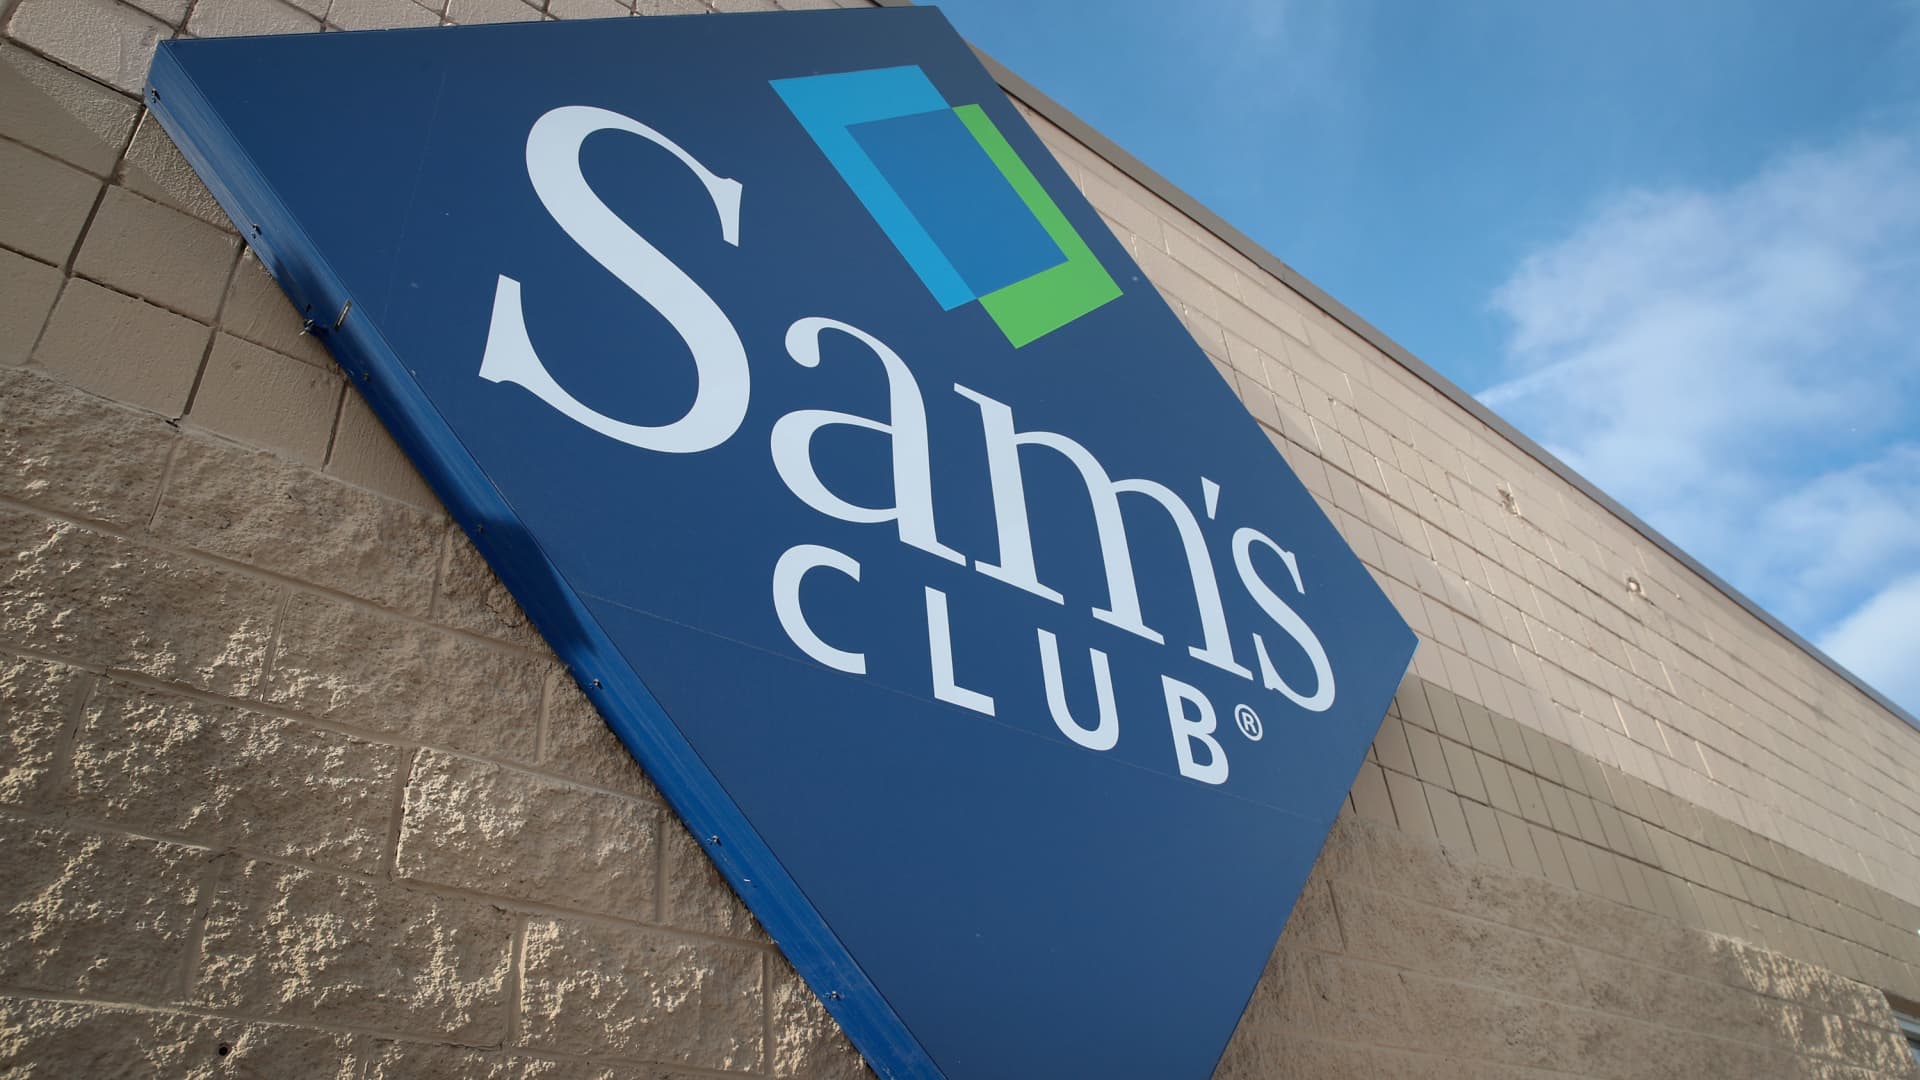 Walmart-owned Sam's Club raises annual membership fee for first time in 9 years